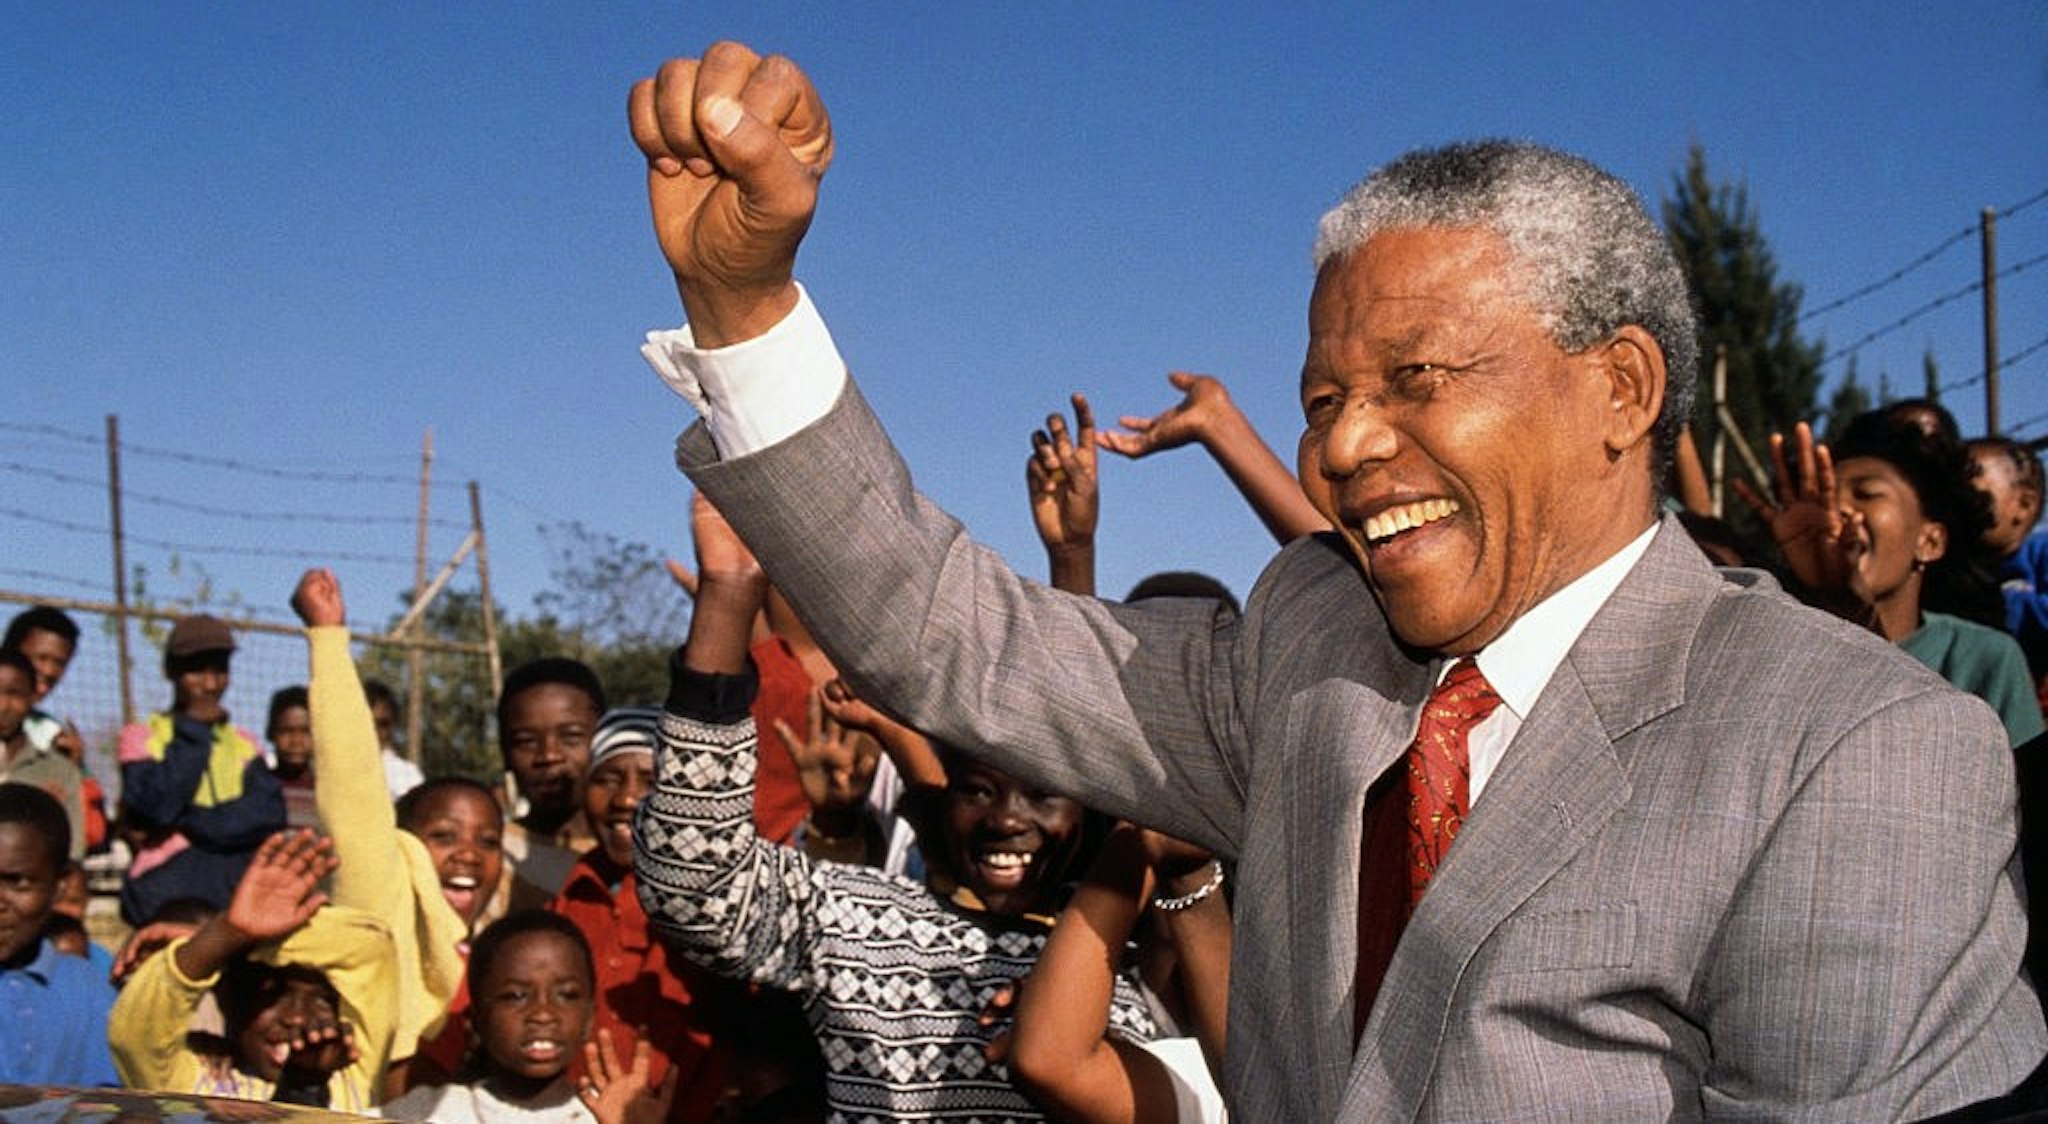 (Original Caption) Johannesburg, South Africa: Nelson Mandela visits Hlengiwe School to encourage students to learn - Former President of South Africa and longtime political prisoner, held by the Apartheid based government from 1964-1990 for sabotage. With the coming of a freer political climate, Mandela was released from his life sentence at Victor Vester Prison on February 11, of 1990. He went on to lead the African National Congress in negotiations with President F.W. de Klerk, that resulted in the end of Apartheid and full citizenship for all South Africans. He and de Klerk received a joint Nobel Peace Prize in 1993 for their efforts. Mandela was elected president in 1994. (Photo by ©